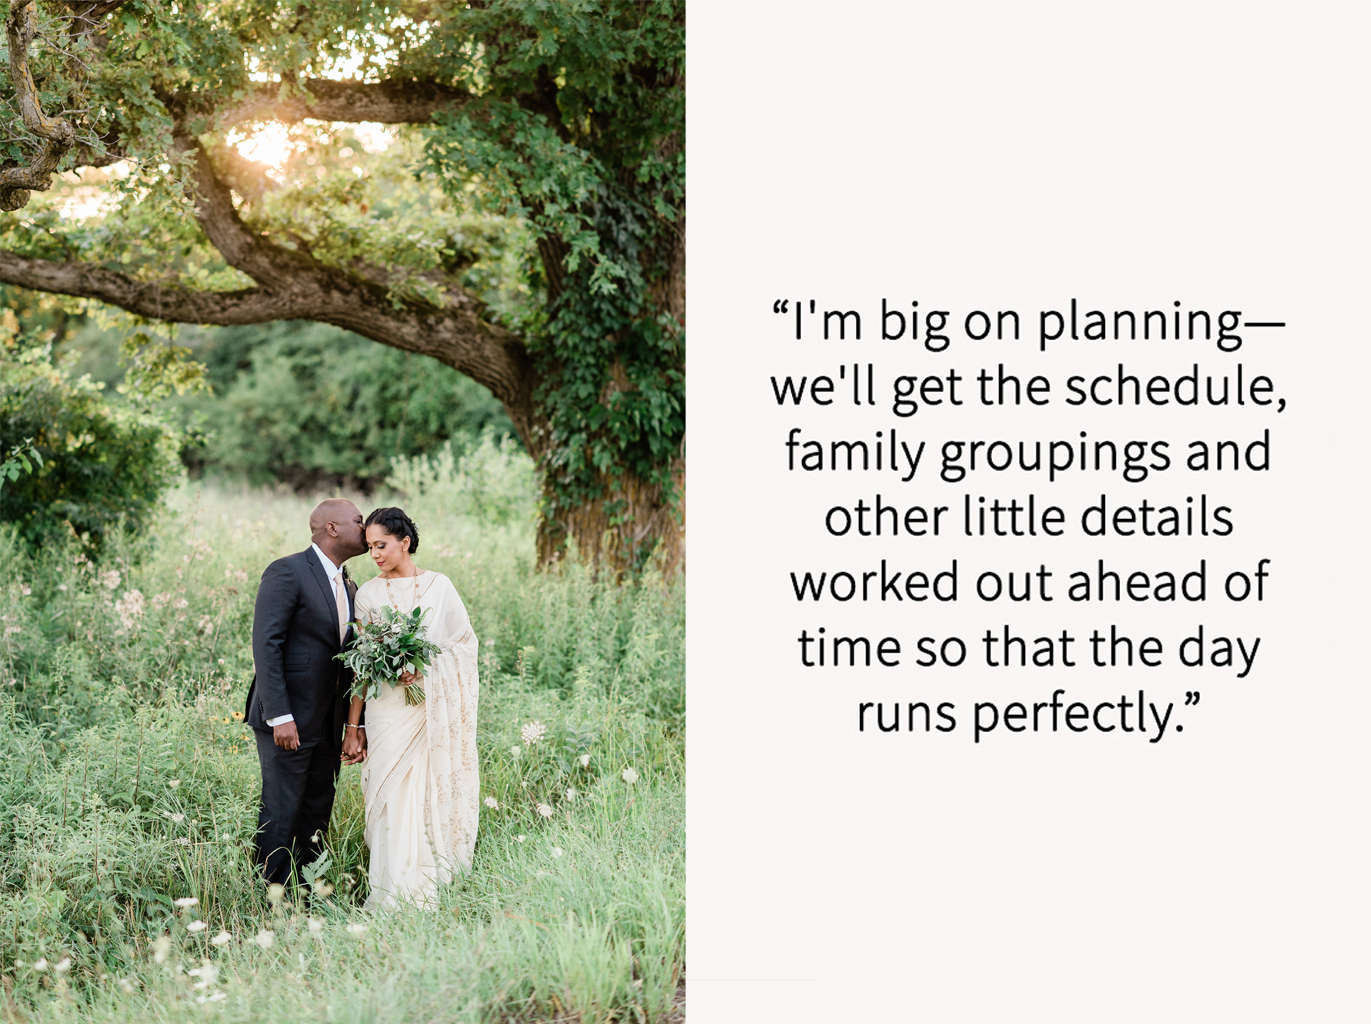 East Lansing, Michigan wedding photographers with a natural style